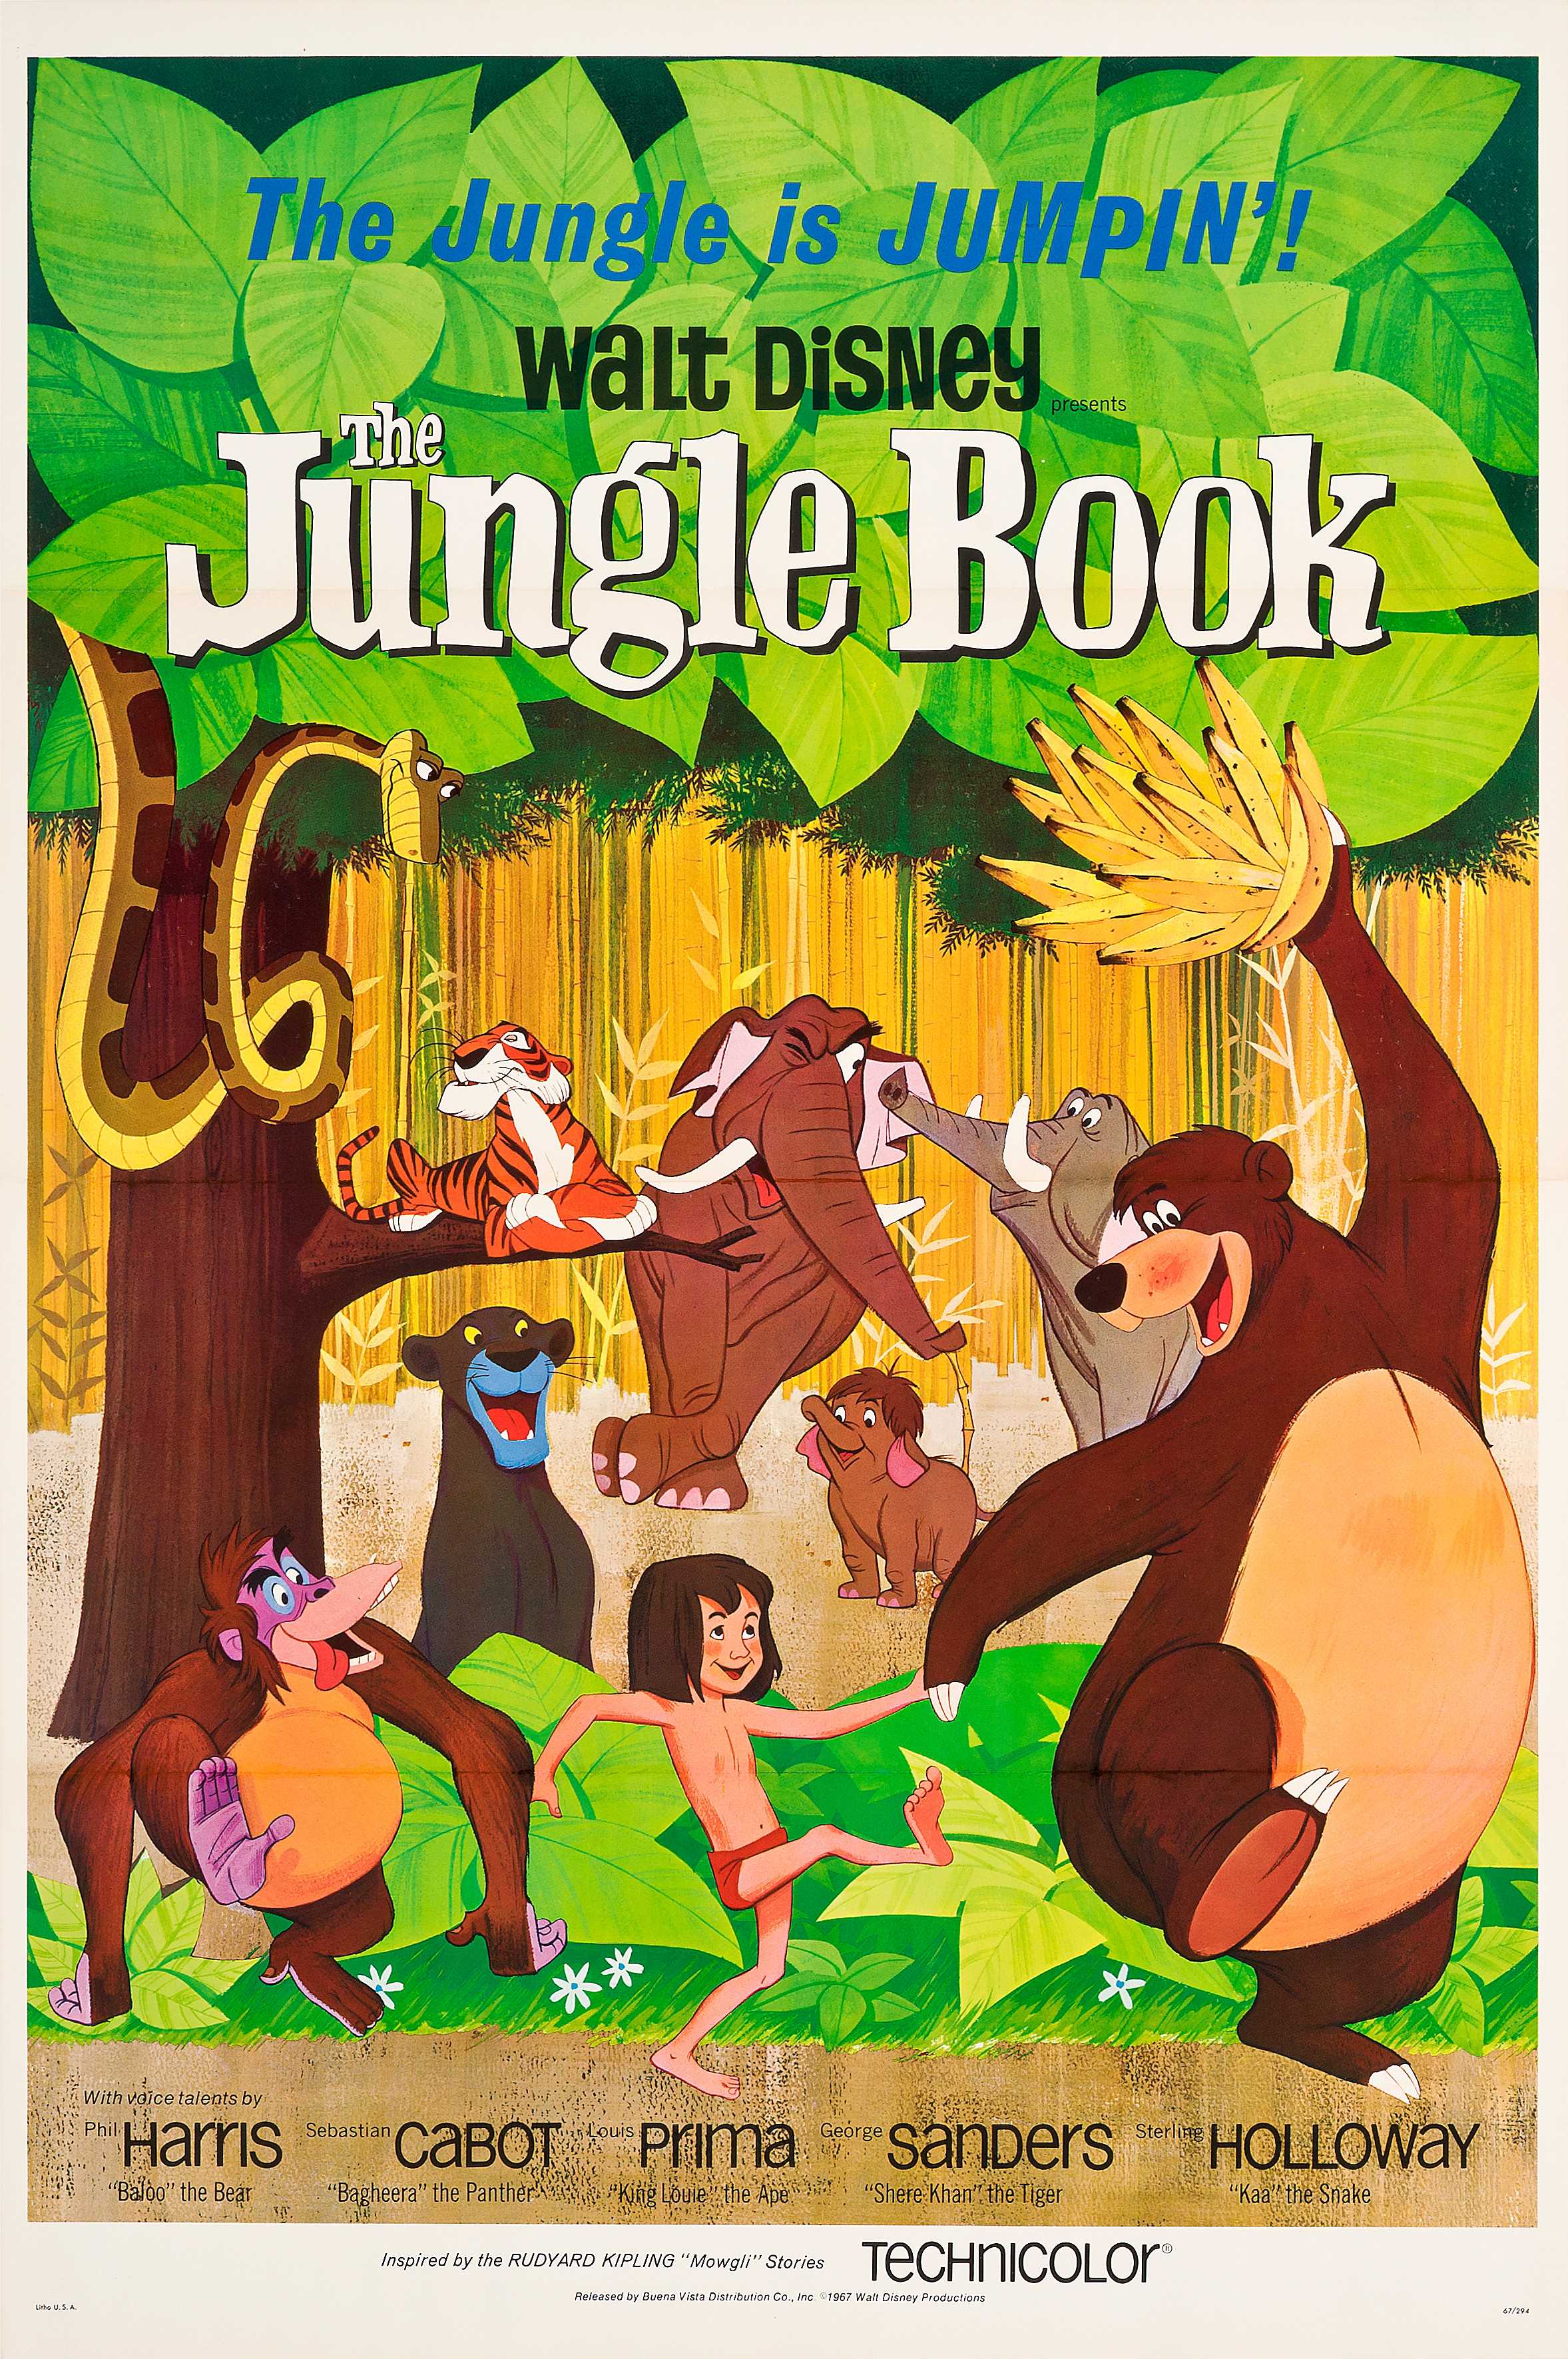 download the new for ios The Jungle Book